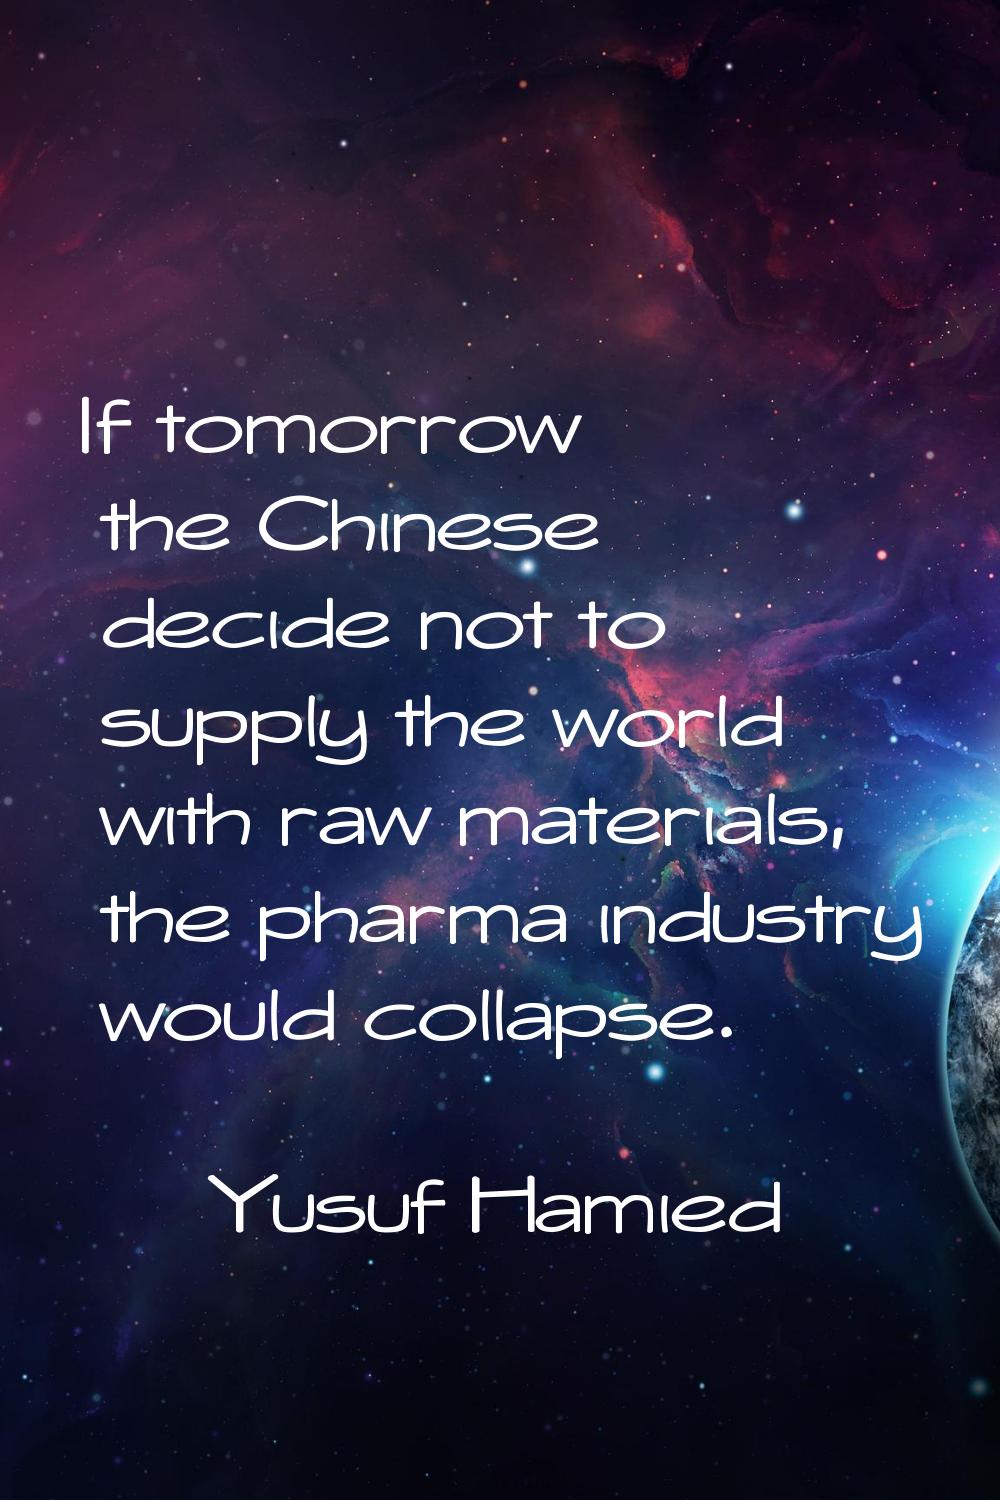 If tomorrow the Chinese decide not to supply the world with raw materials, the pharma industry woul